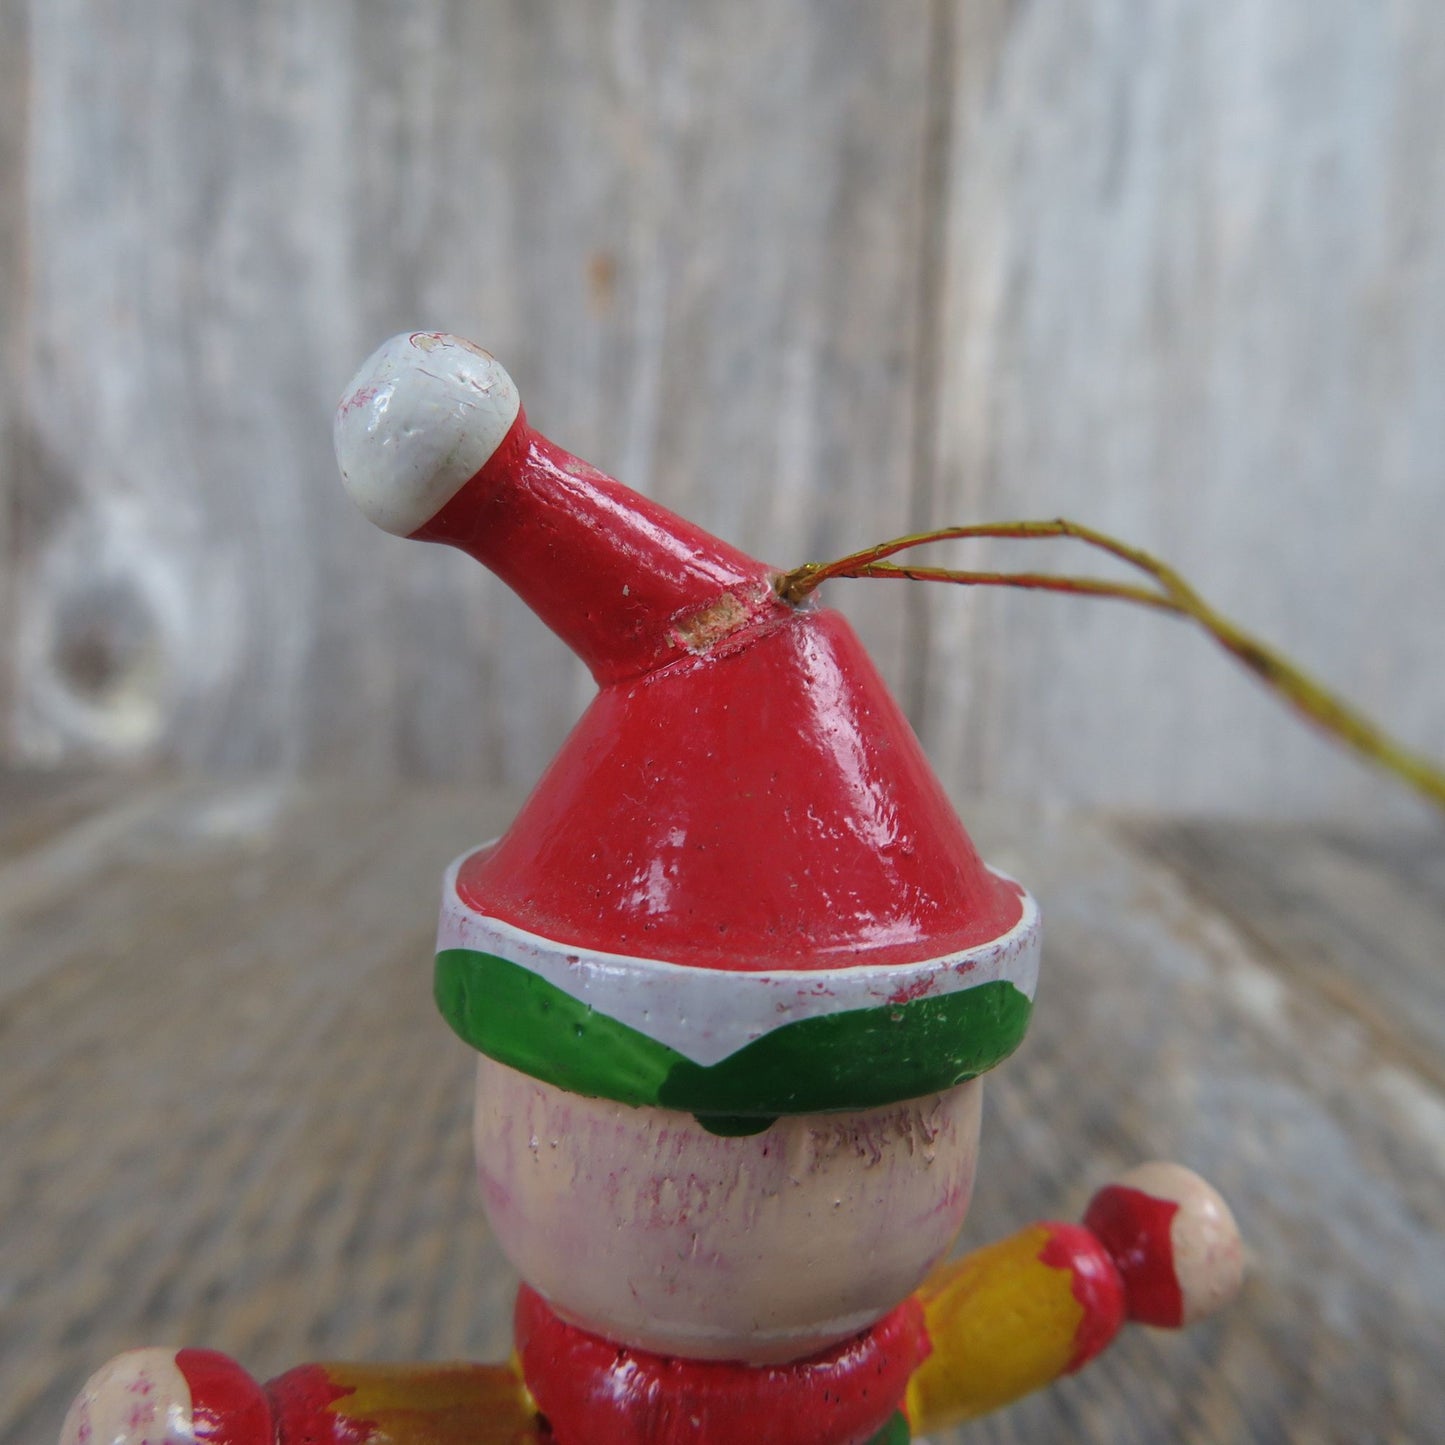 Vintage Jack In A Box Wood Ornament Clown Red Green Wooden Christmas Candy Cane